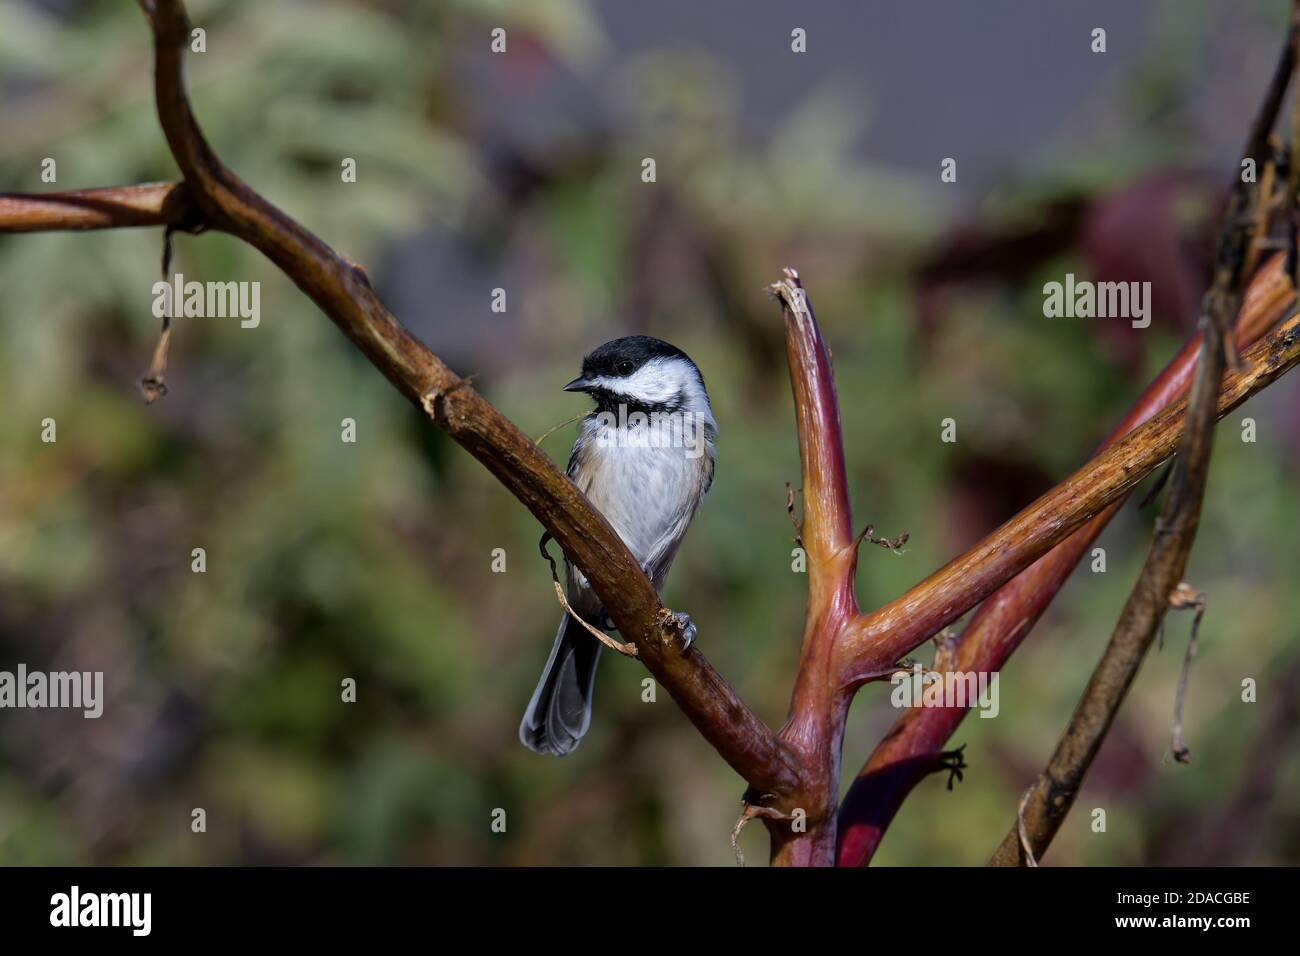 Blacked-capped chickadee on a branch on a sunny autumn day. They are a small, non-migratory North American songbird that lives in deciduous forests. Stock Photo